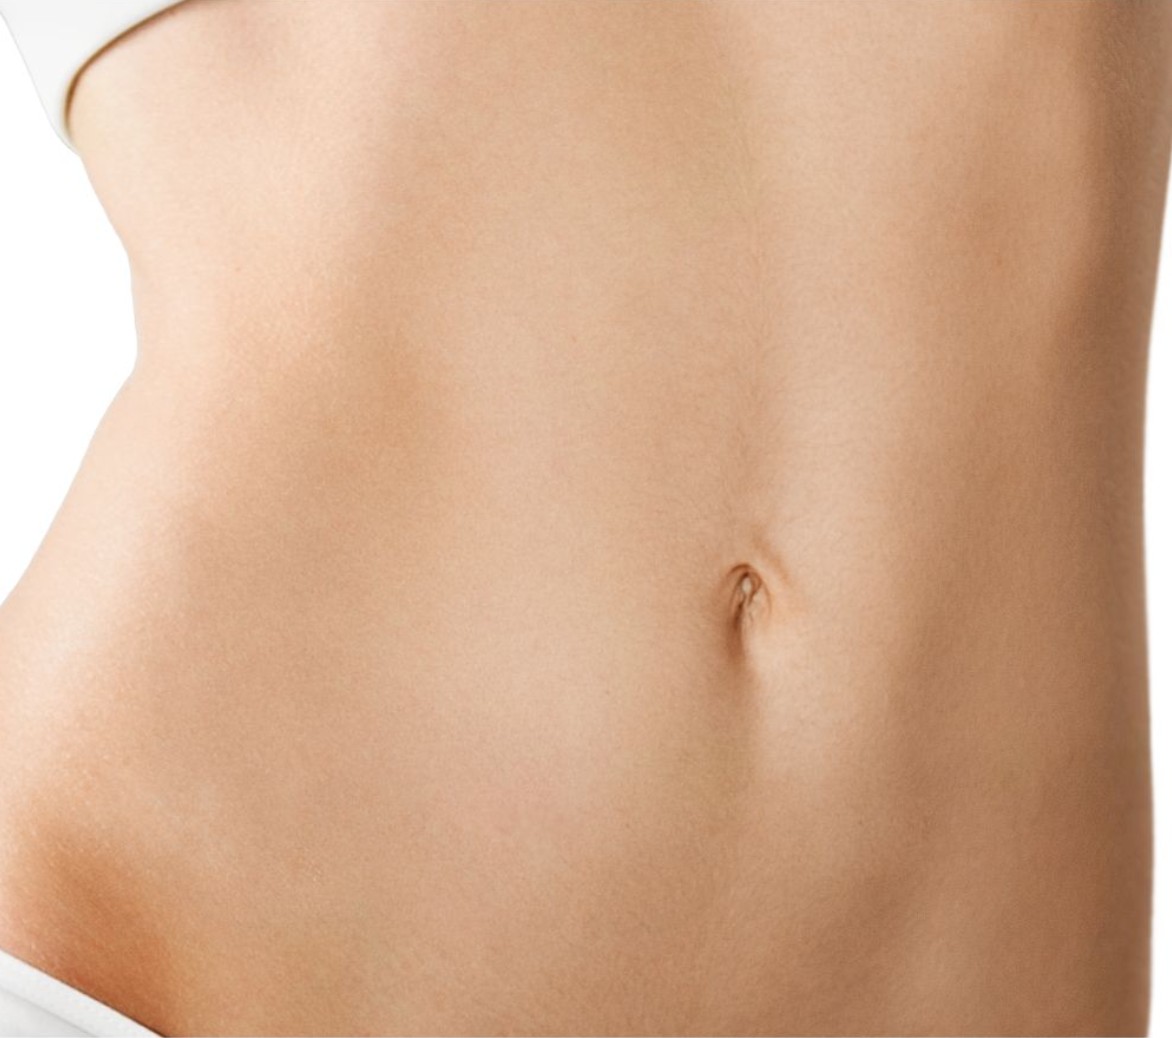 THE BEST 10 Body Contouring near PALMDALE, CA 93550 - Last Updated